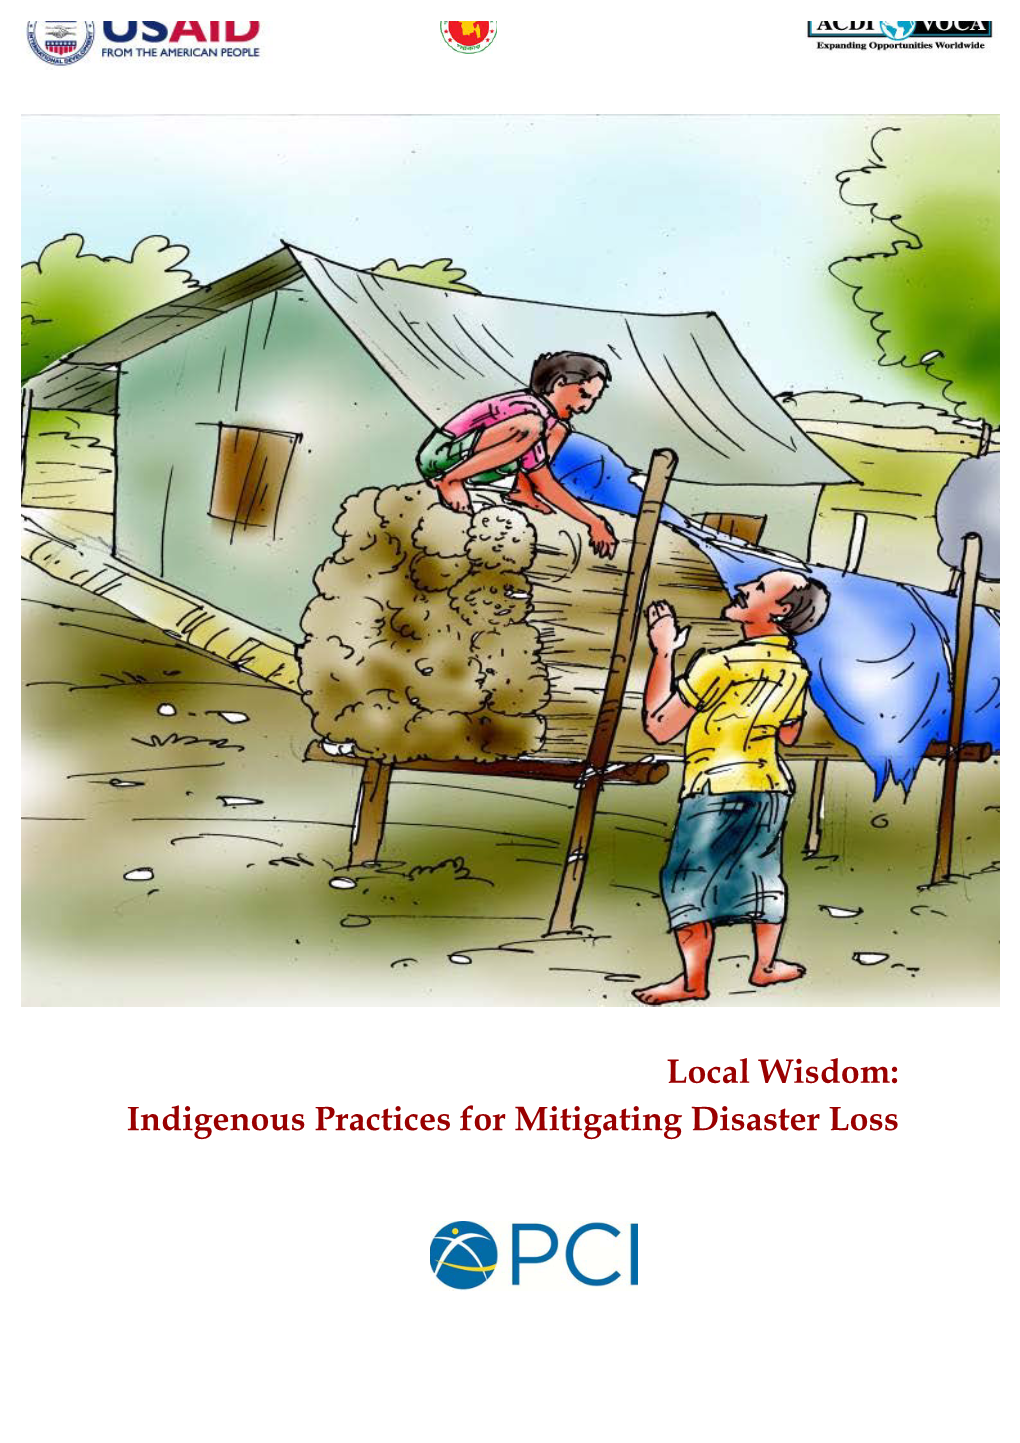 Local Wisdom: Indigenous Practices for Mitigating Disaster Loss